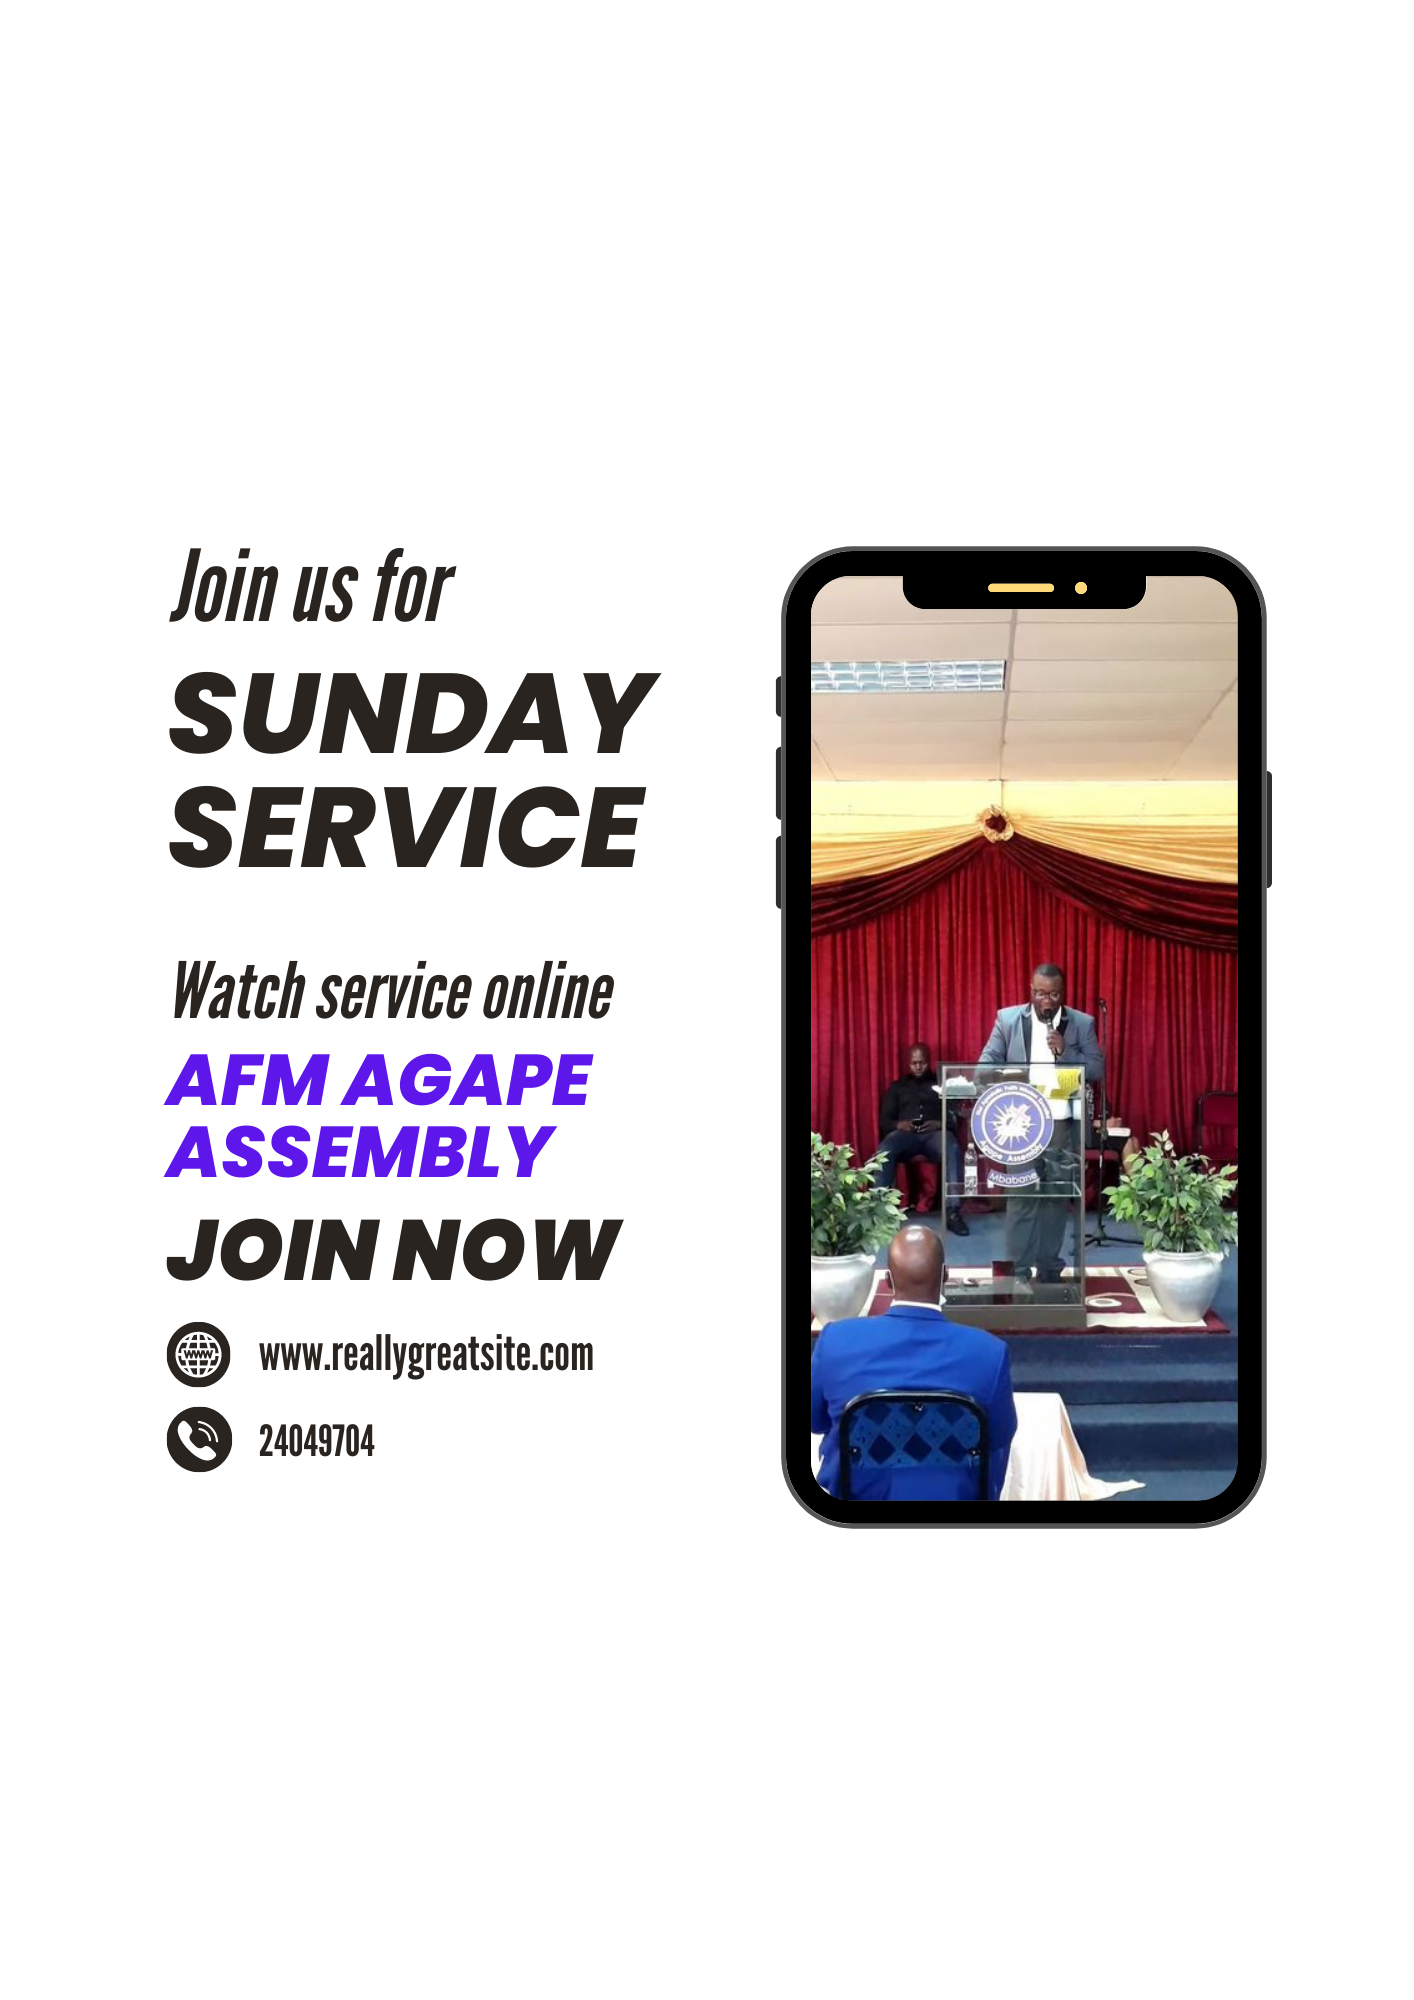 Come and join us this coming Sunday Service